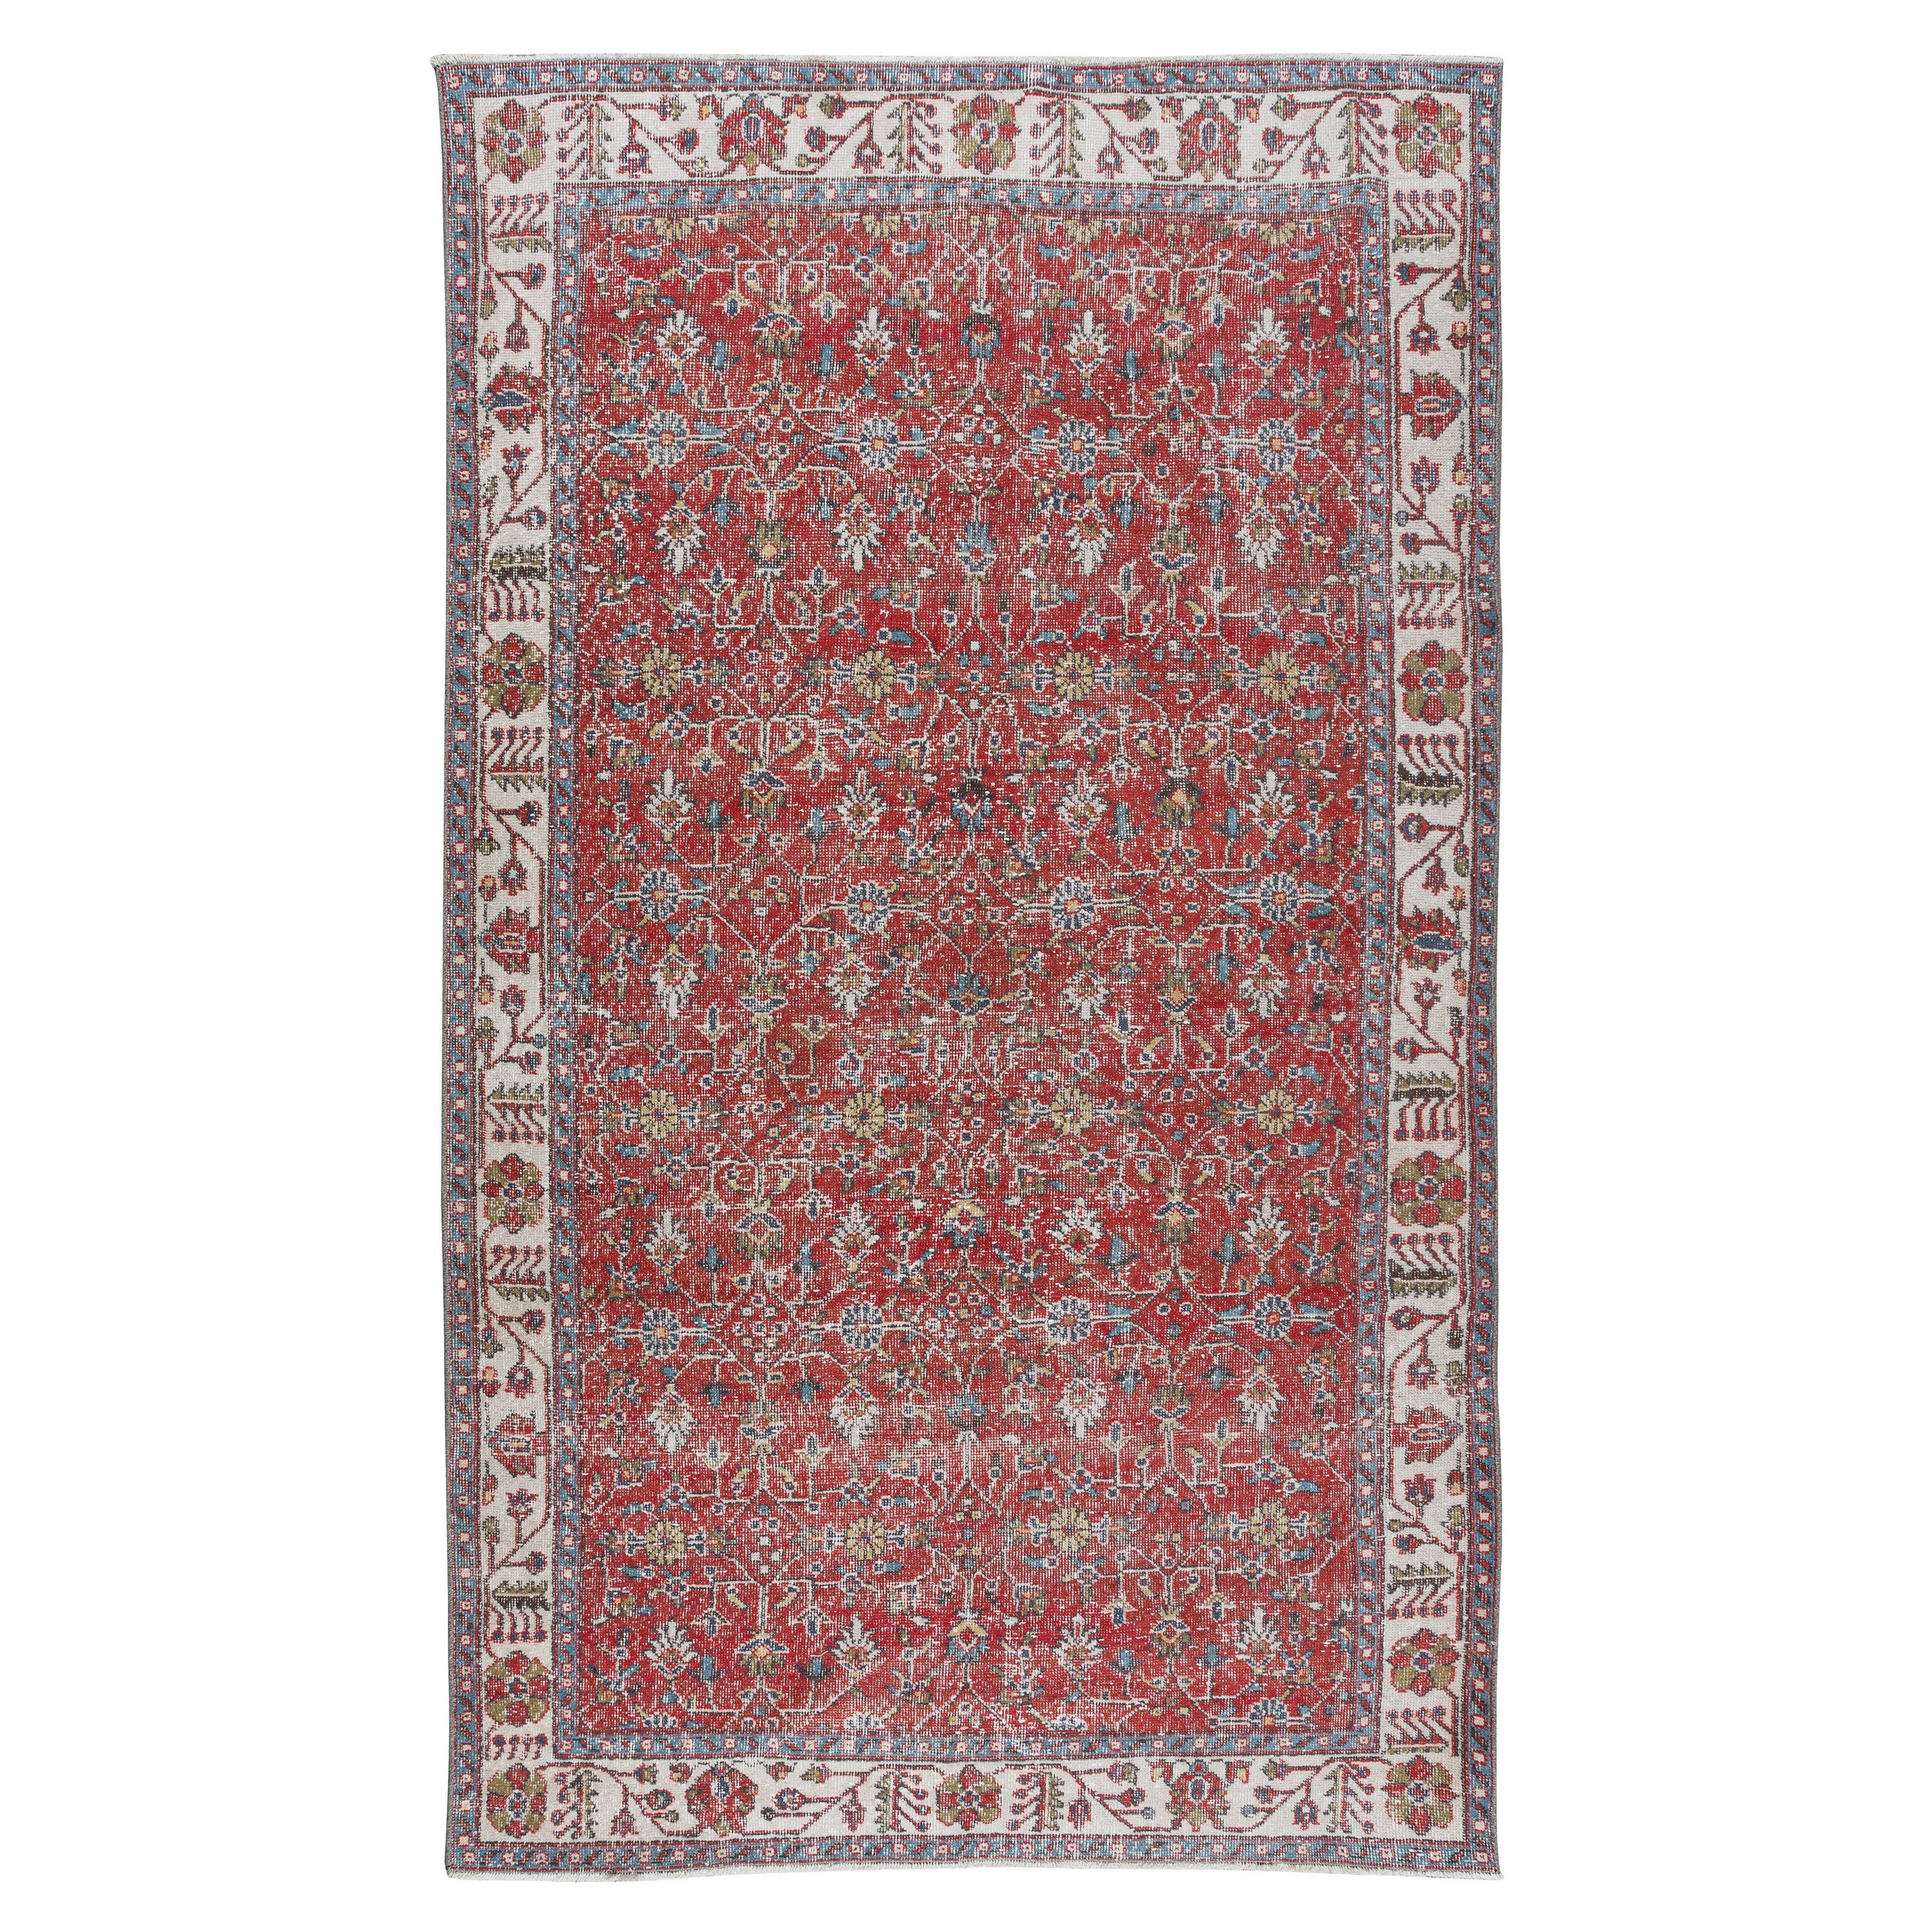 5.7x9.7 Ft Vintage Floral Hand Knotted Anatolian Wool Area Rug in Red & Beige For Sale